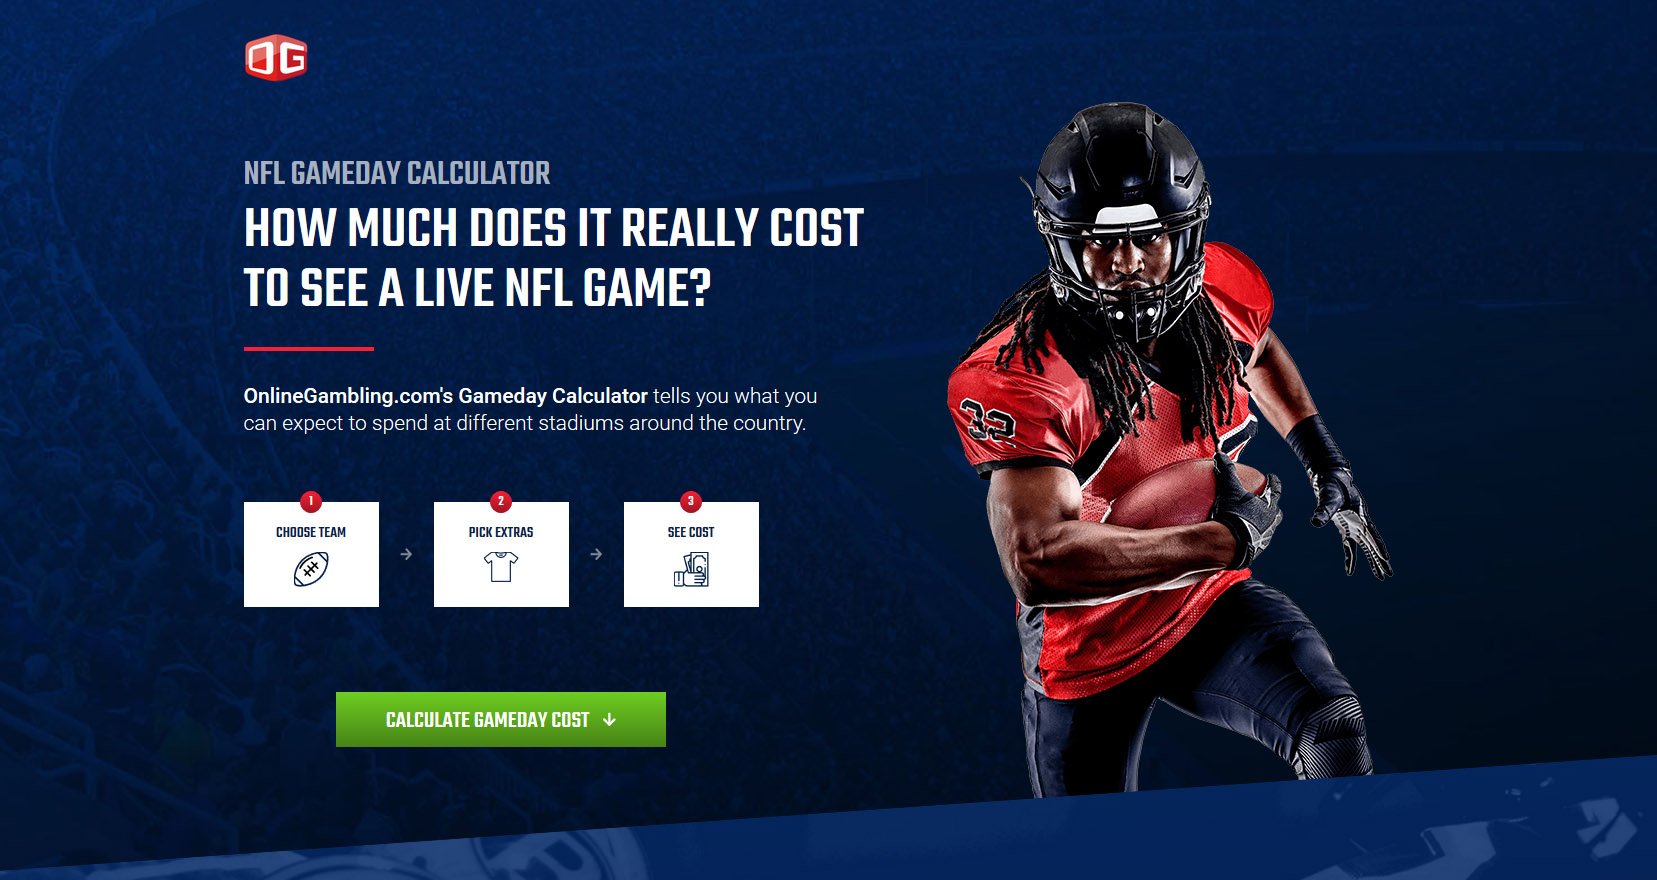 Entertaining New Gameday Calculator Shows How Much It Really Costs To See A Live NFL Game